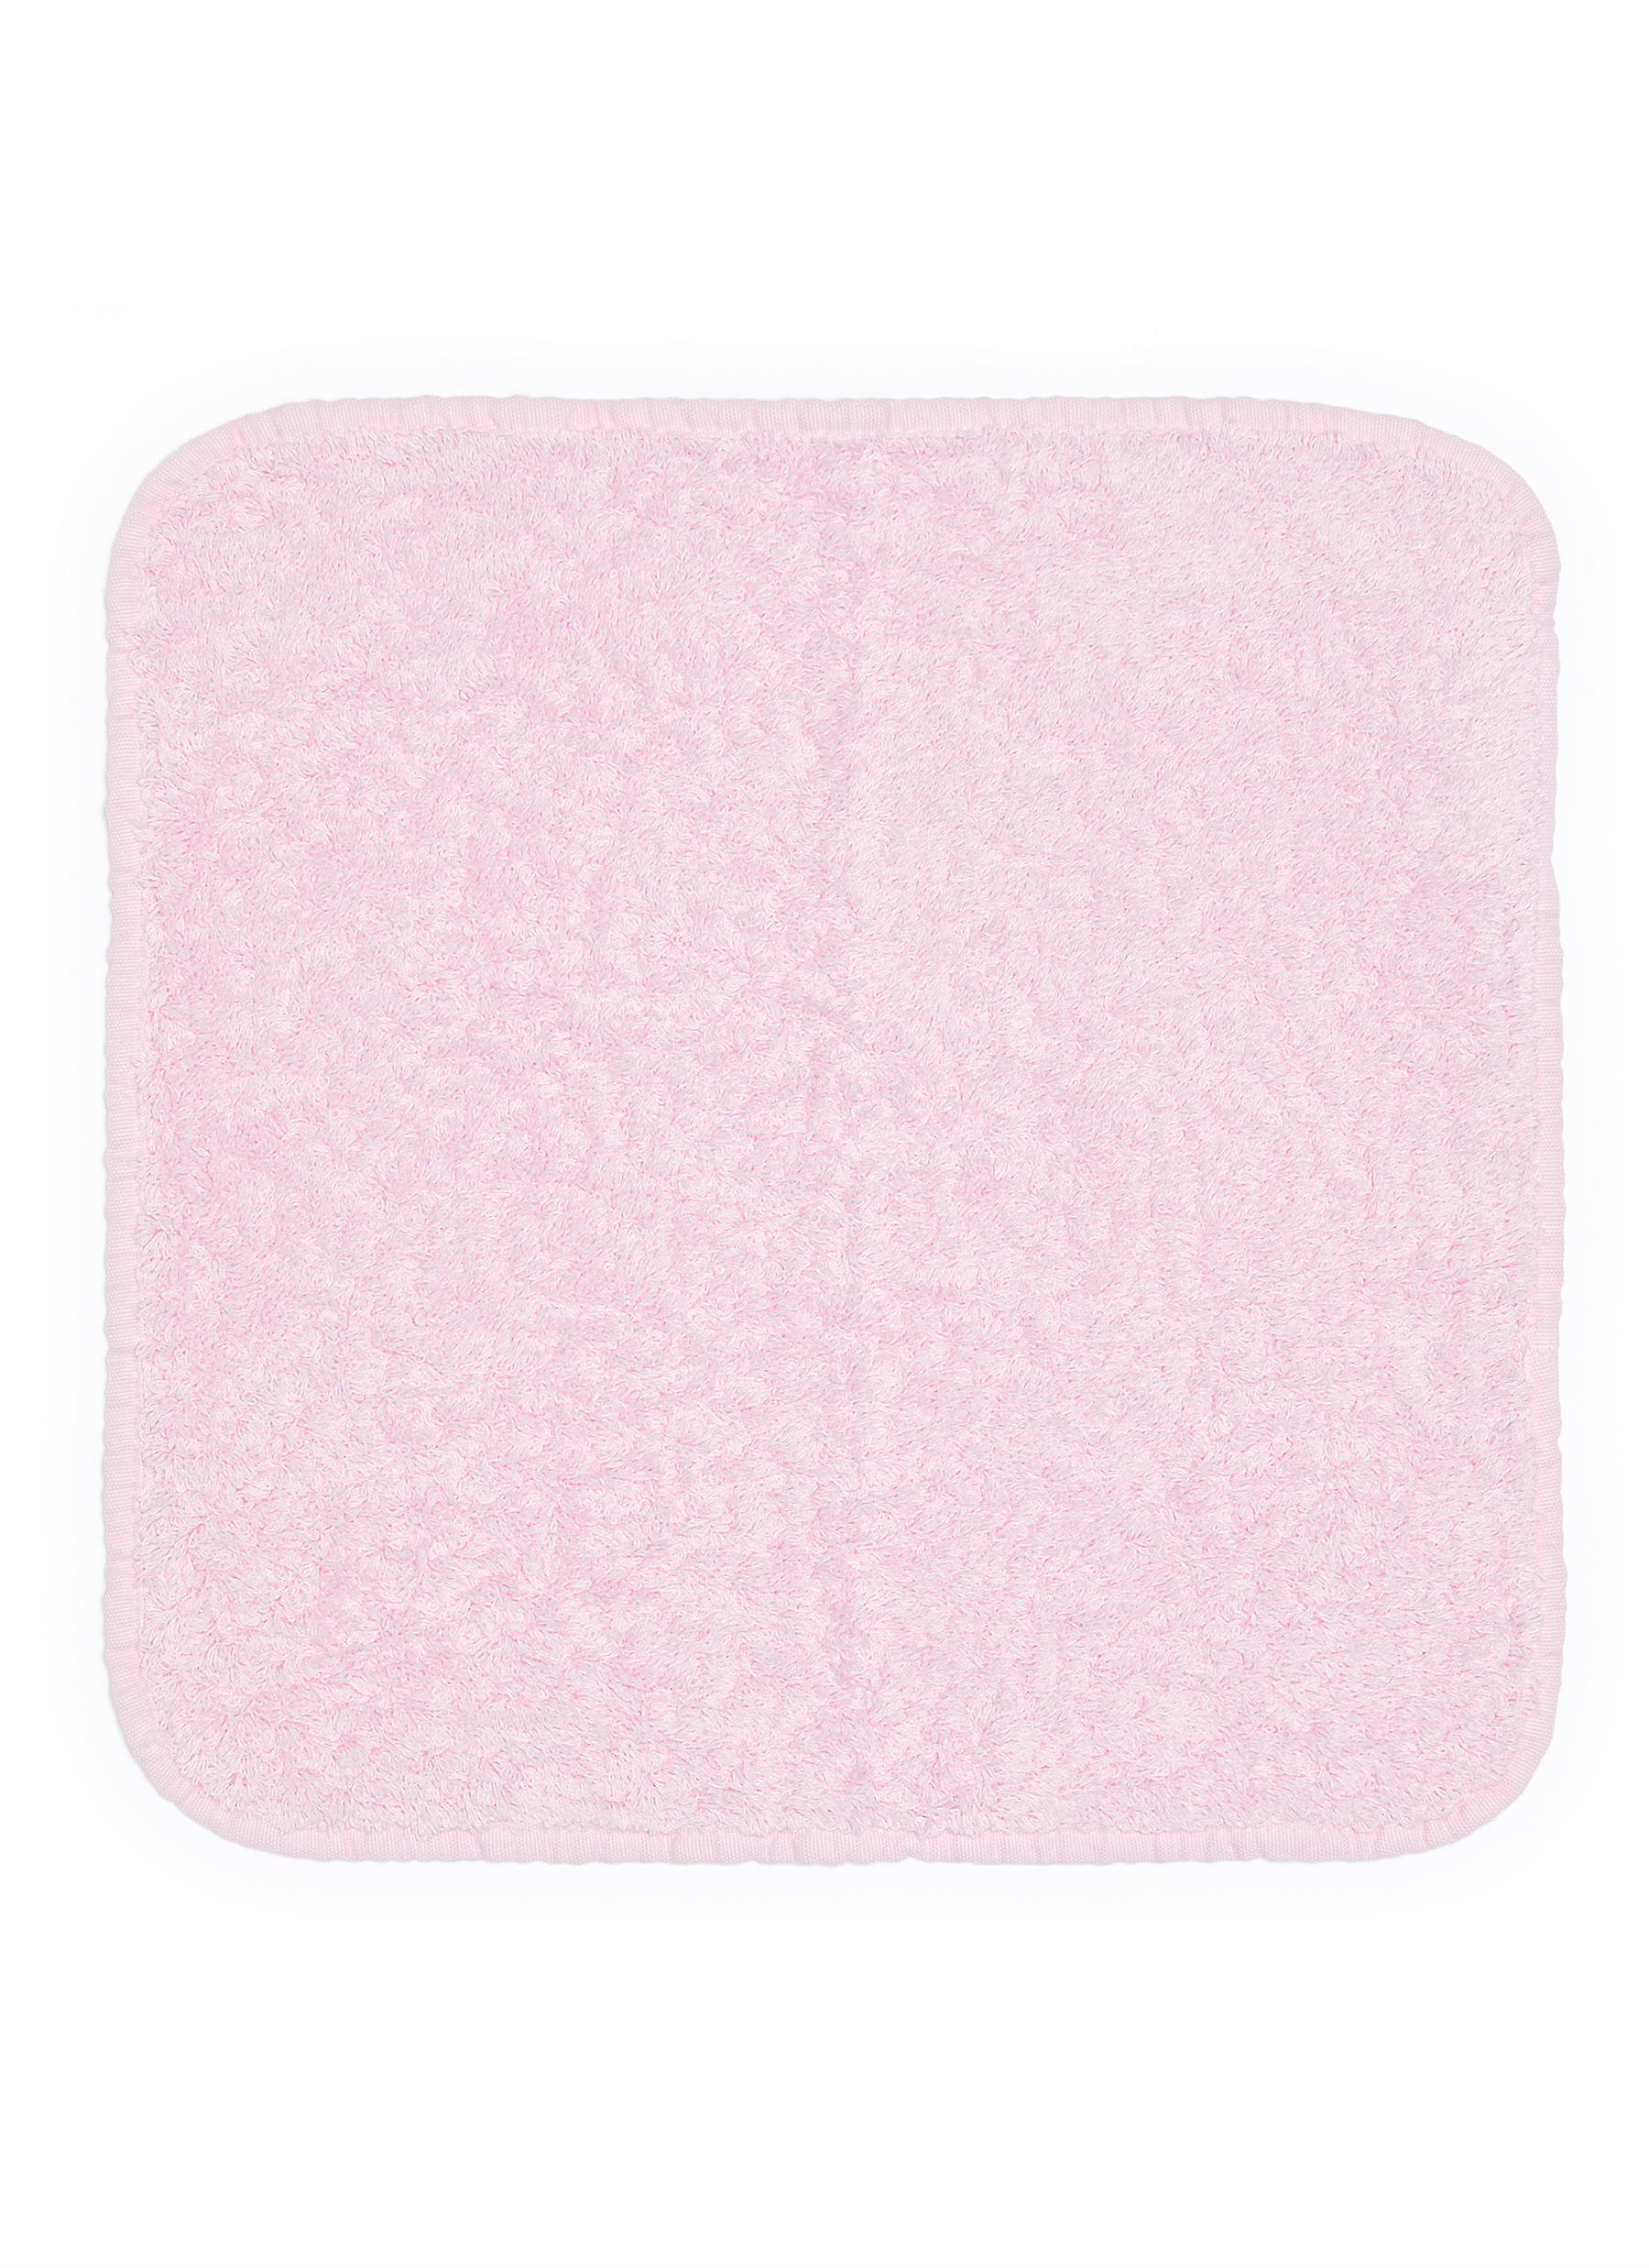 Abyss Super Pile Cotton Face Cloth - Pink Lady